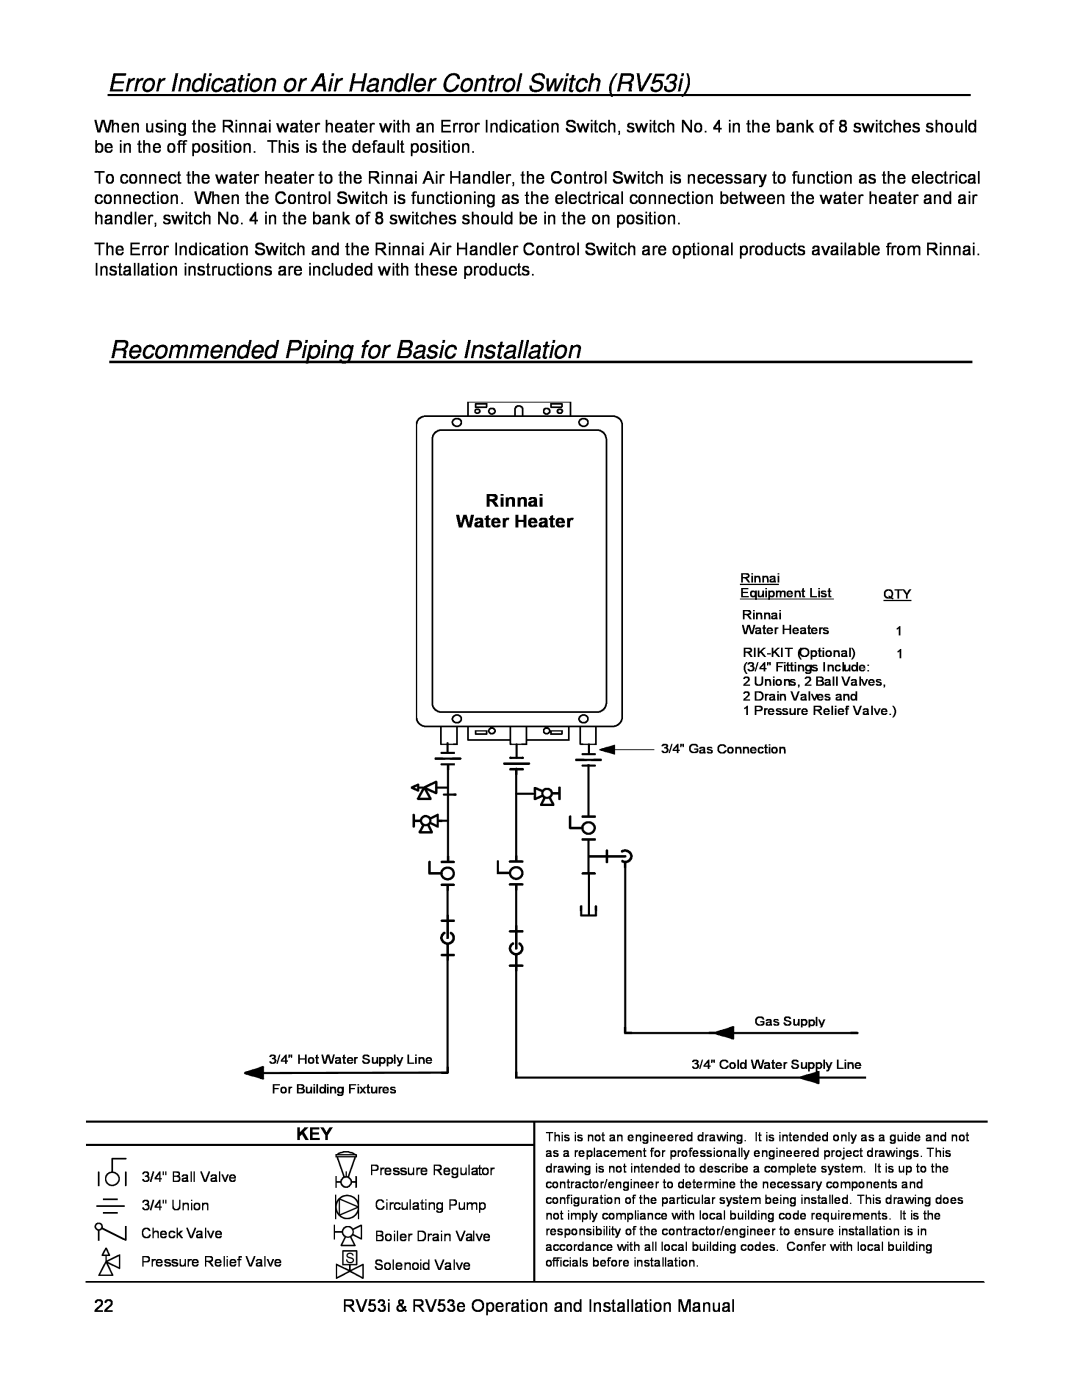 Rinnai RV53E, RV53I installation manual Recommended Piping for Basic Installation, Rinnai Water Heater 